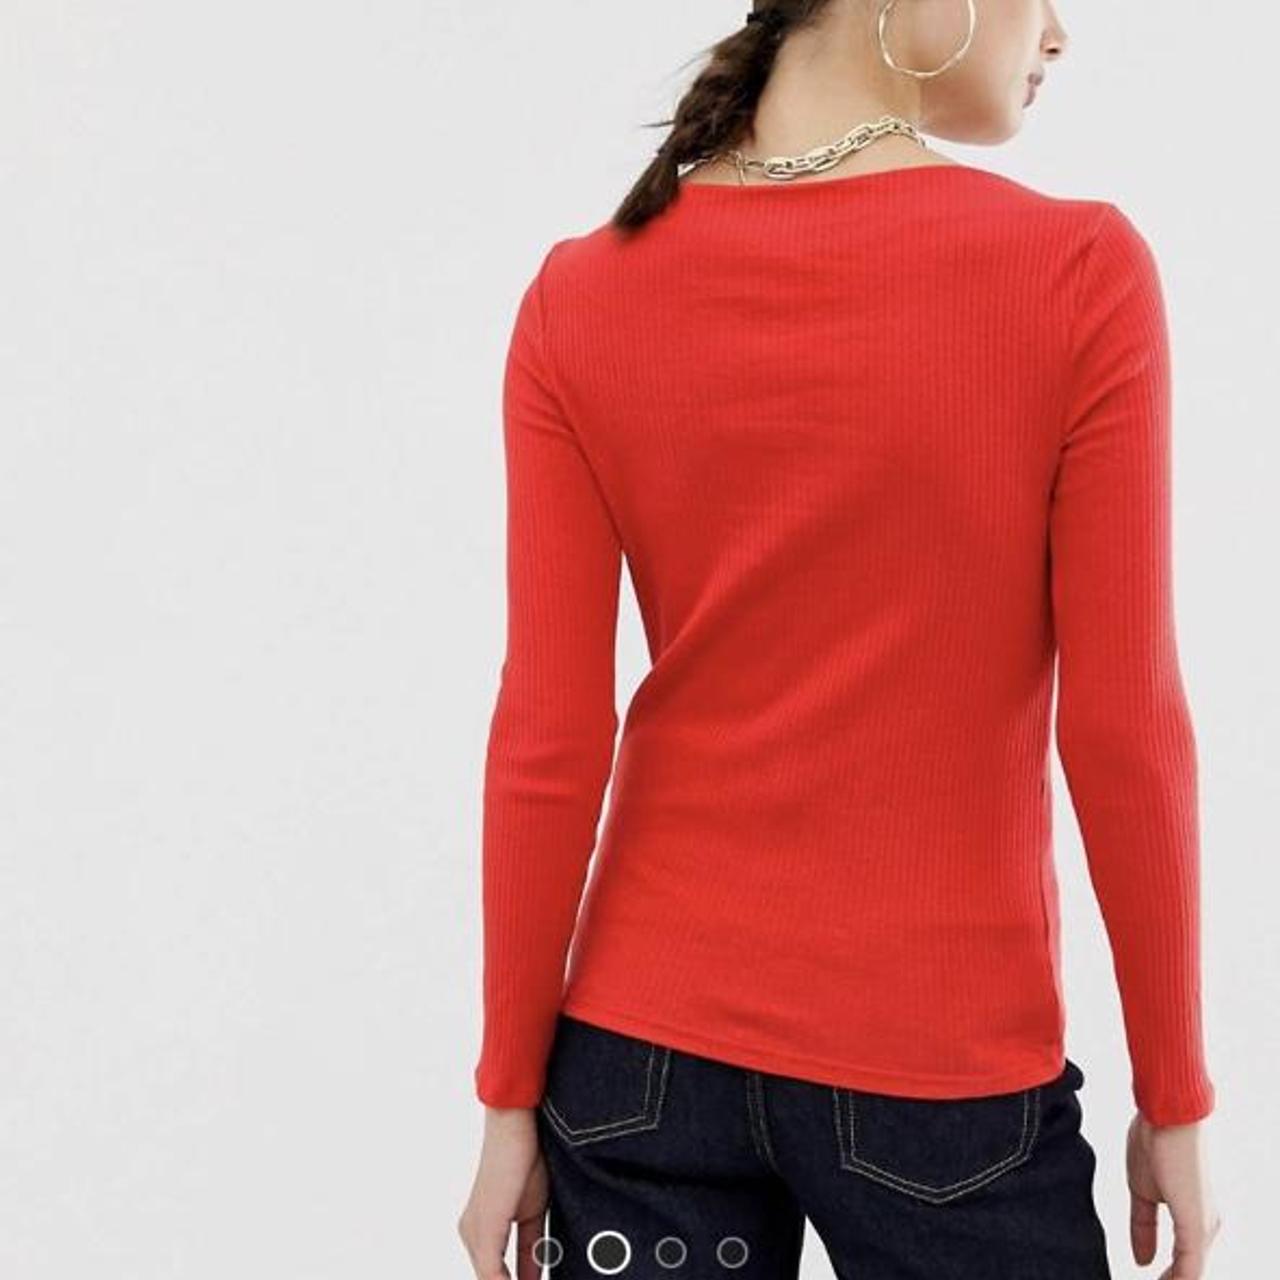 Product Image 2 - .
🍒 River island red shirt